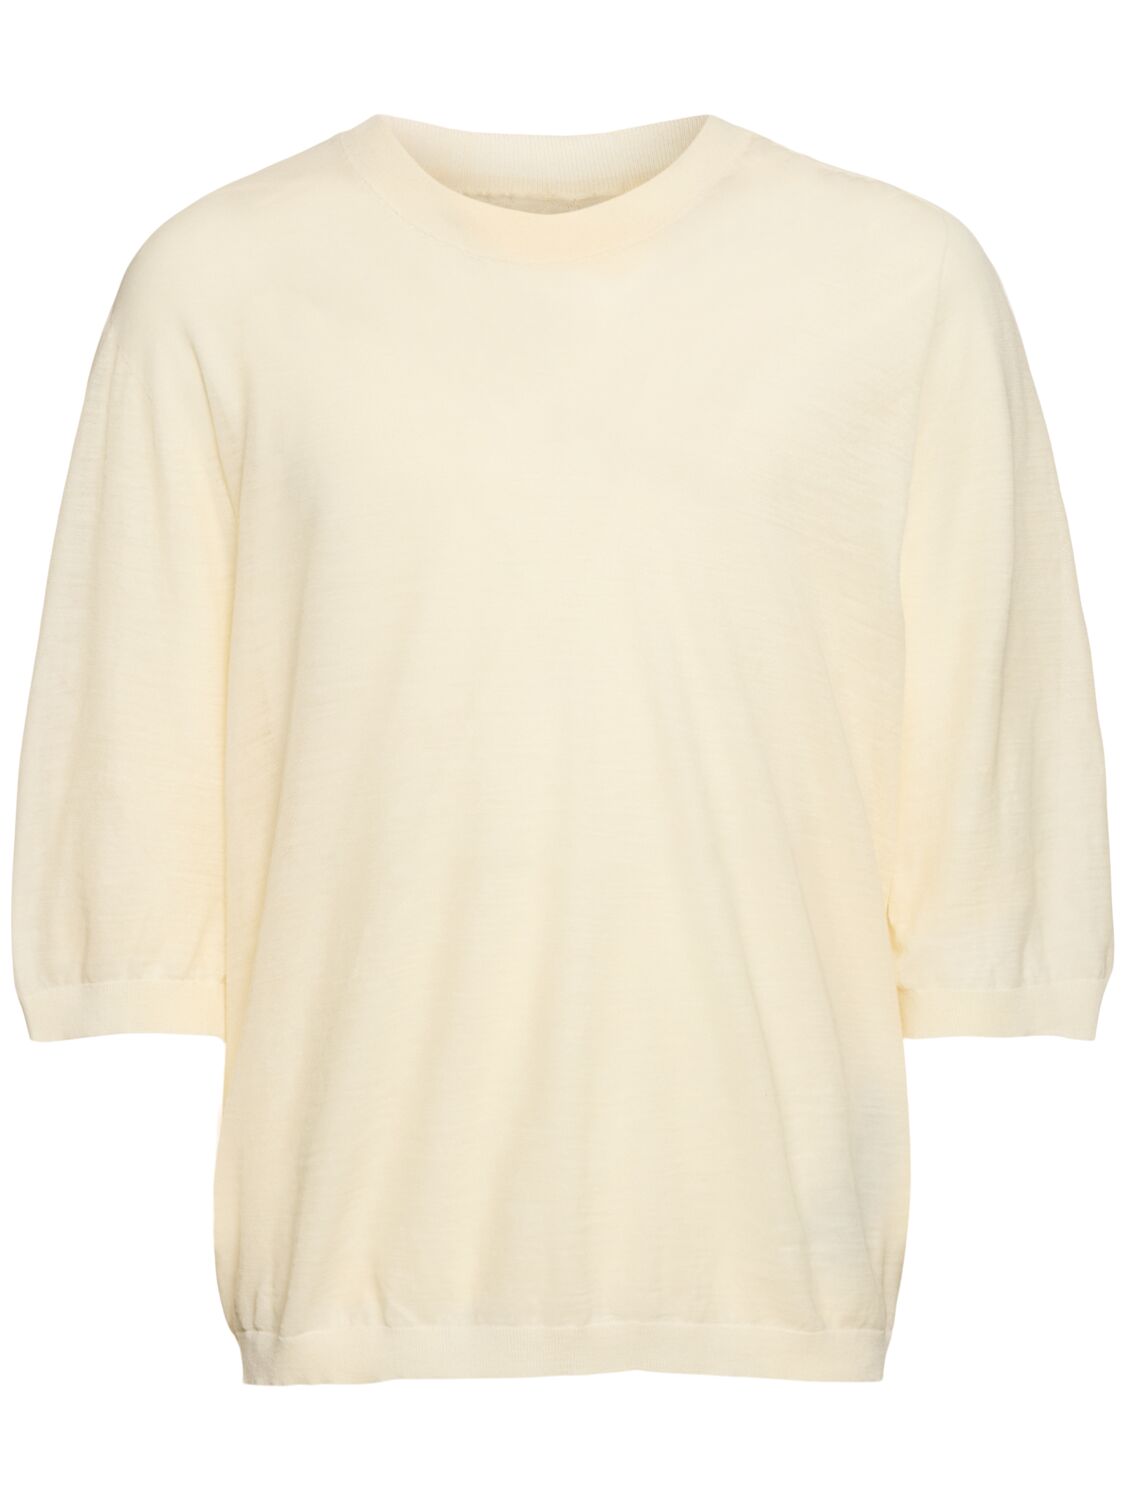 Zegna 3/4 Sleeve Wool Crewneck Sweater In Off White